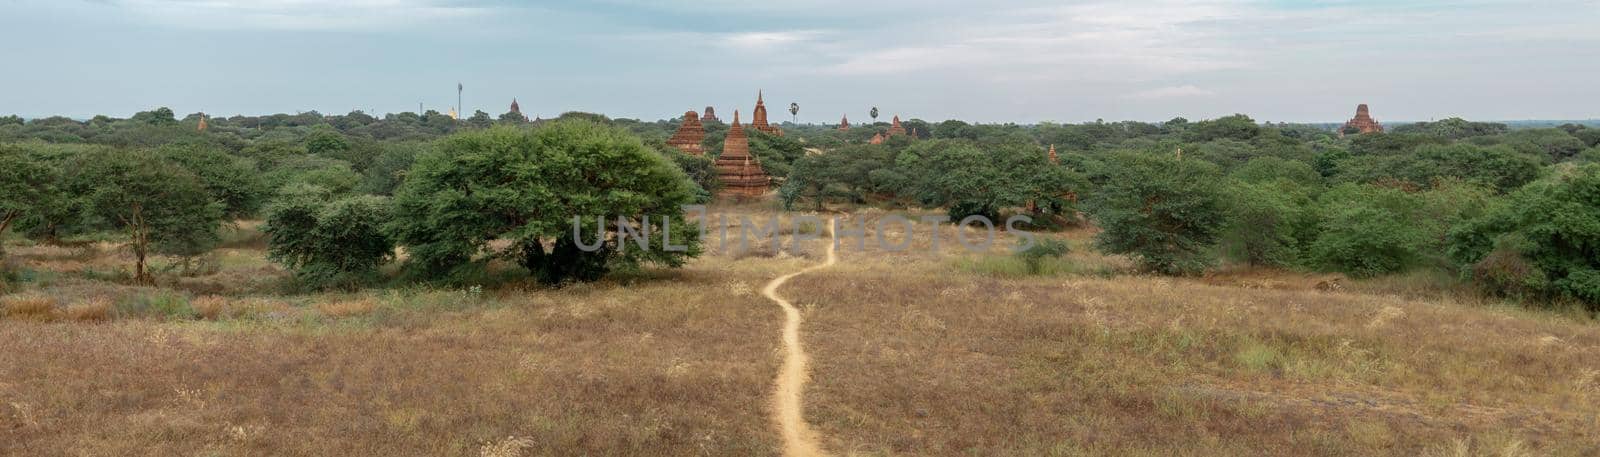 A trail leading towards buddhist temples in Bagan, Myanmar by arvidnorberg